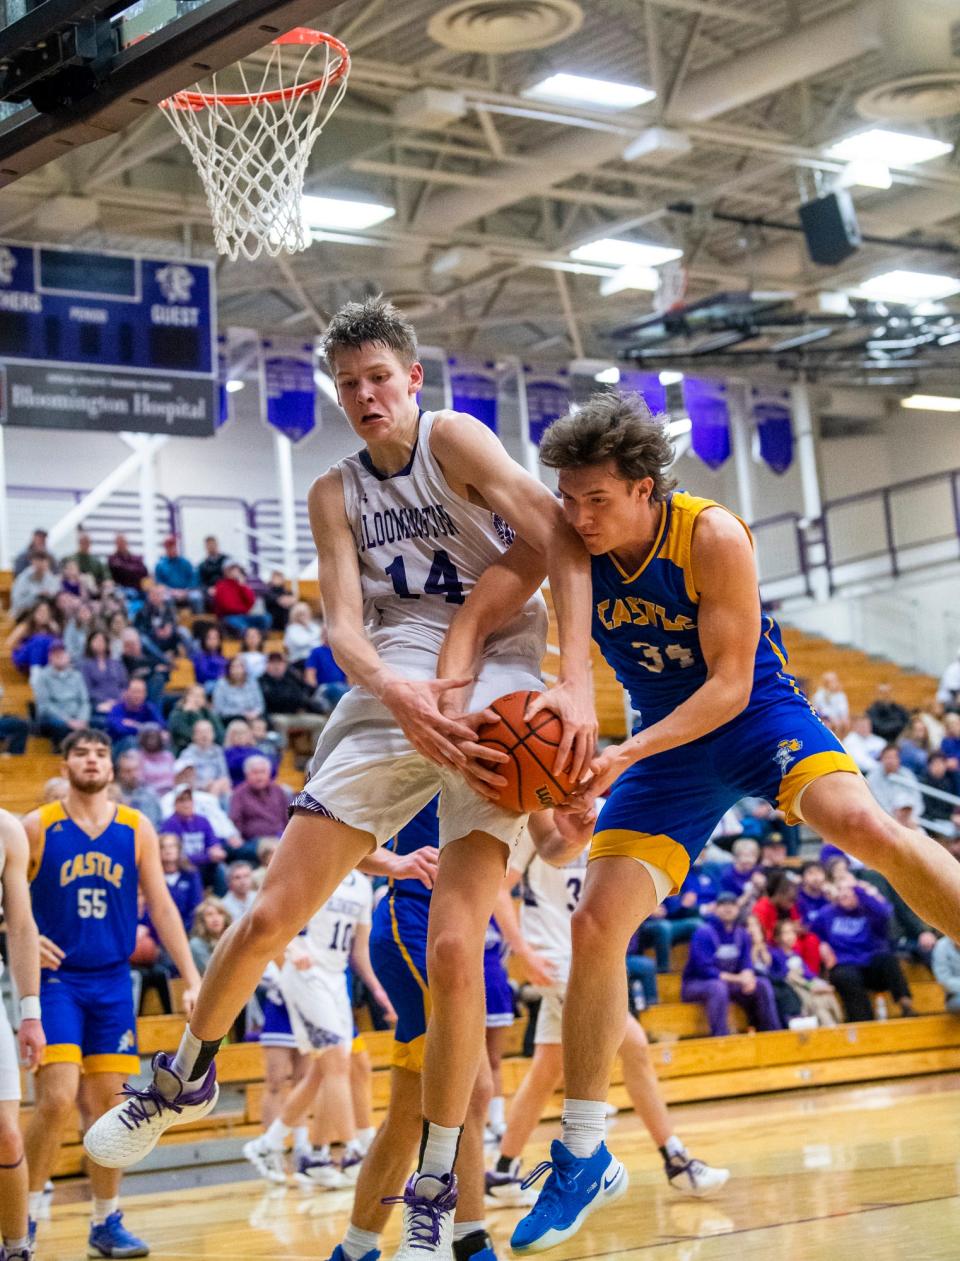 South's Gavin Wisely (14) battles for a rebound with Castle's Brendan Daines (34) during the Bloomington South versus Castle boys basketball game at Bloomington High School South on Friday, Jan. 20, 2023.